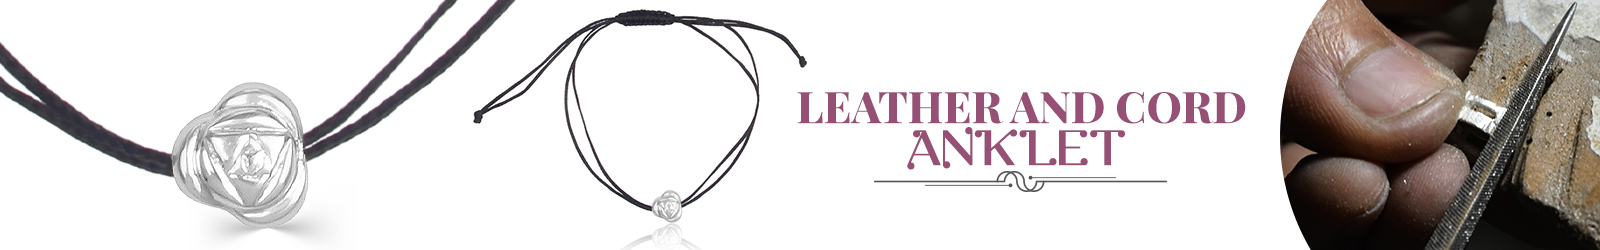 Wholesale leather and cord anklet manufacturer in India